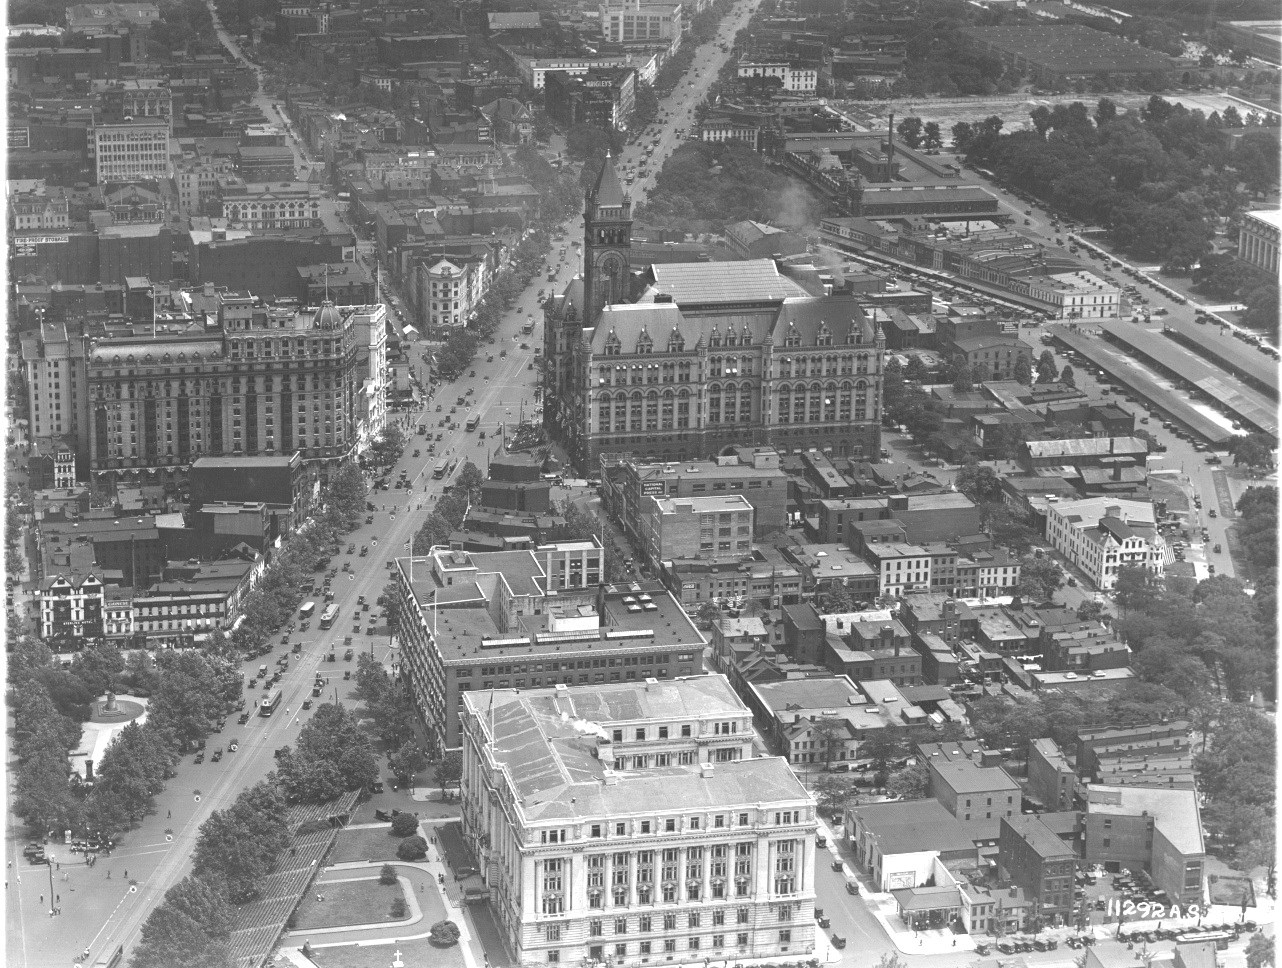 An aerial view of the federal triangle before it was constructed. Old row houses, the old Post Office building and the Center Market are all visible with Pennsylvania Ave to the left.